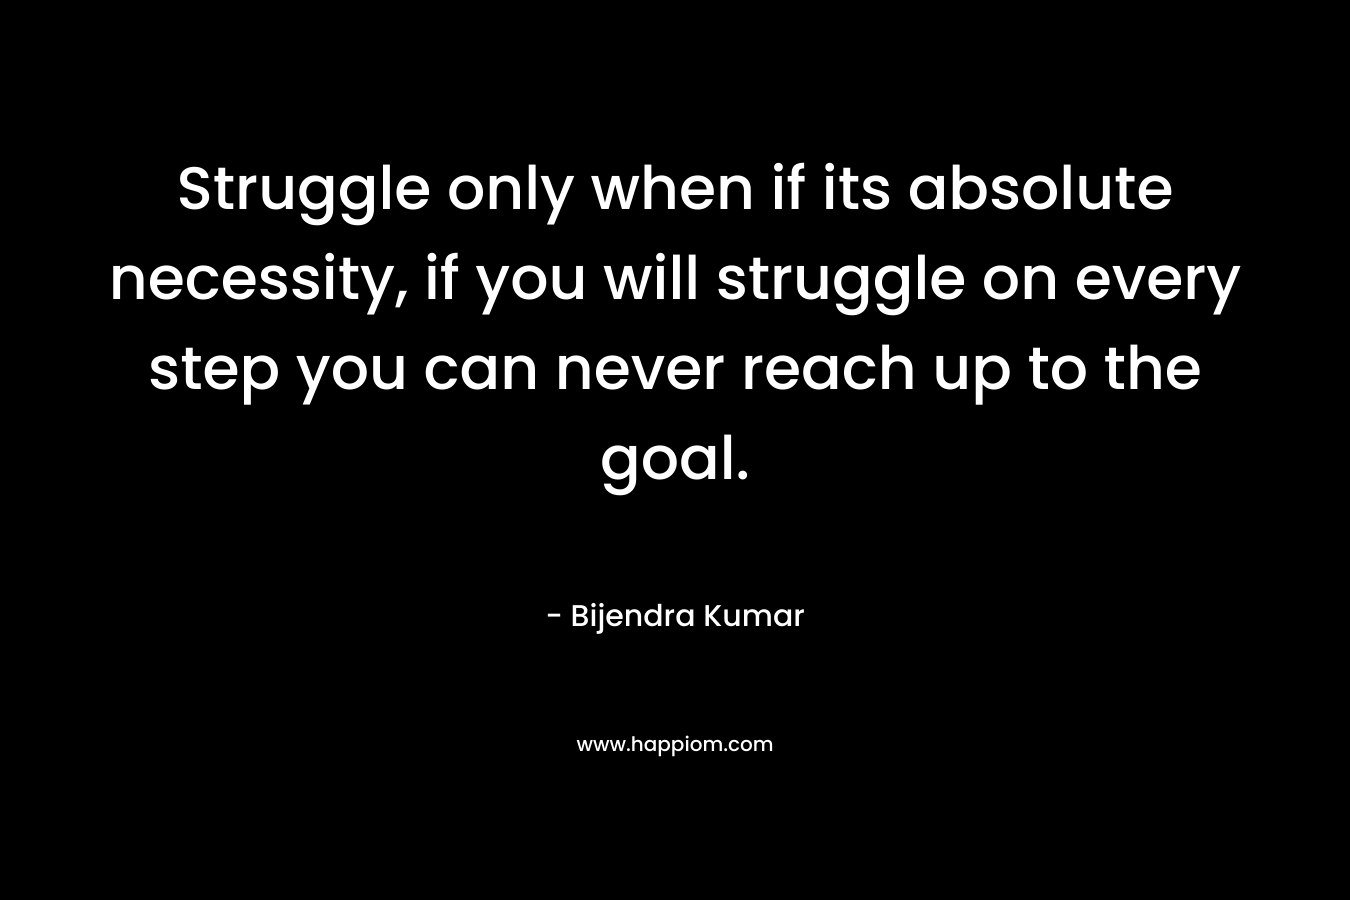 Struggle only when if its absolute necessity, if you will struggle on every step you can never reach up to the goal.